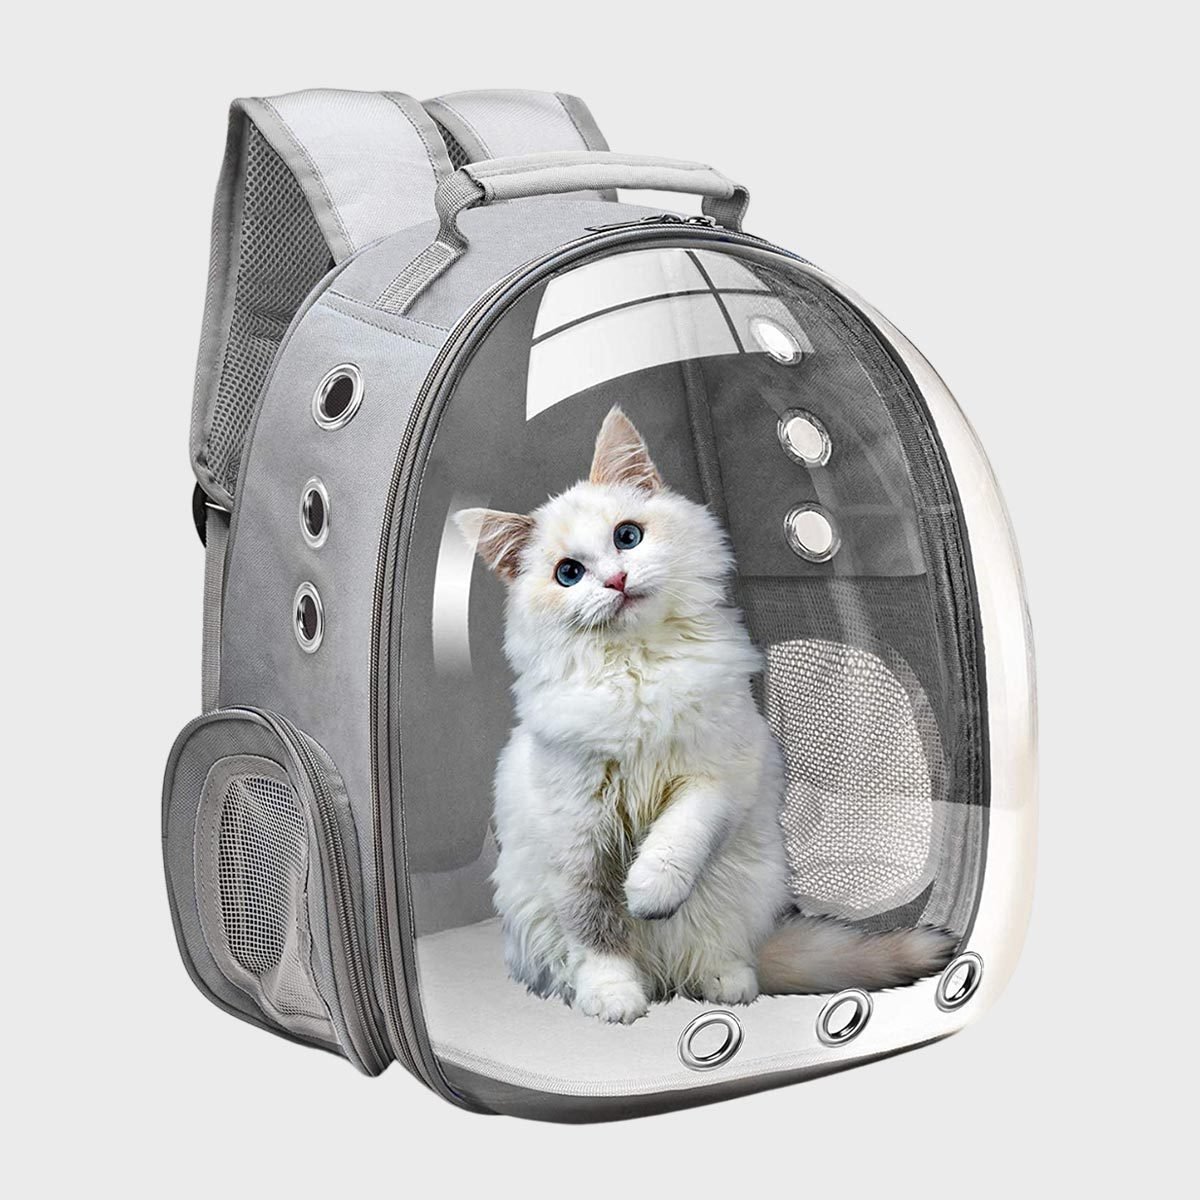 The Best Cat Carriers, According to Veterinarians - DodoWell - The Dodo